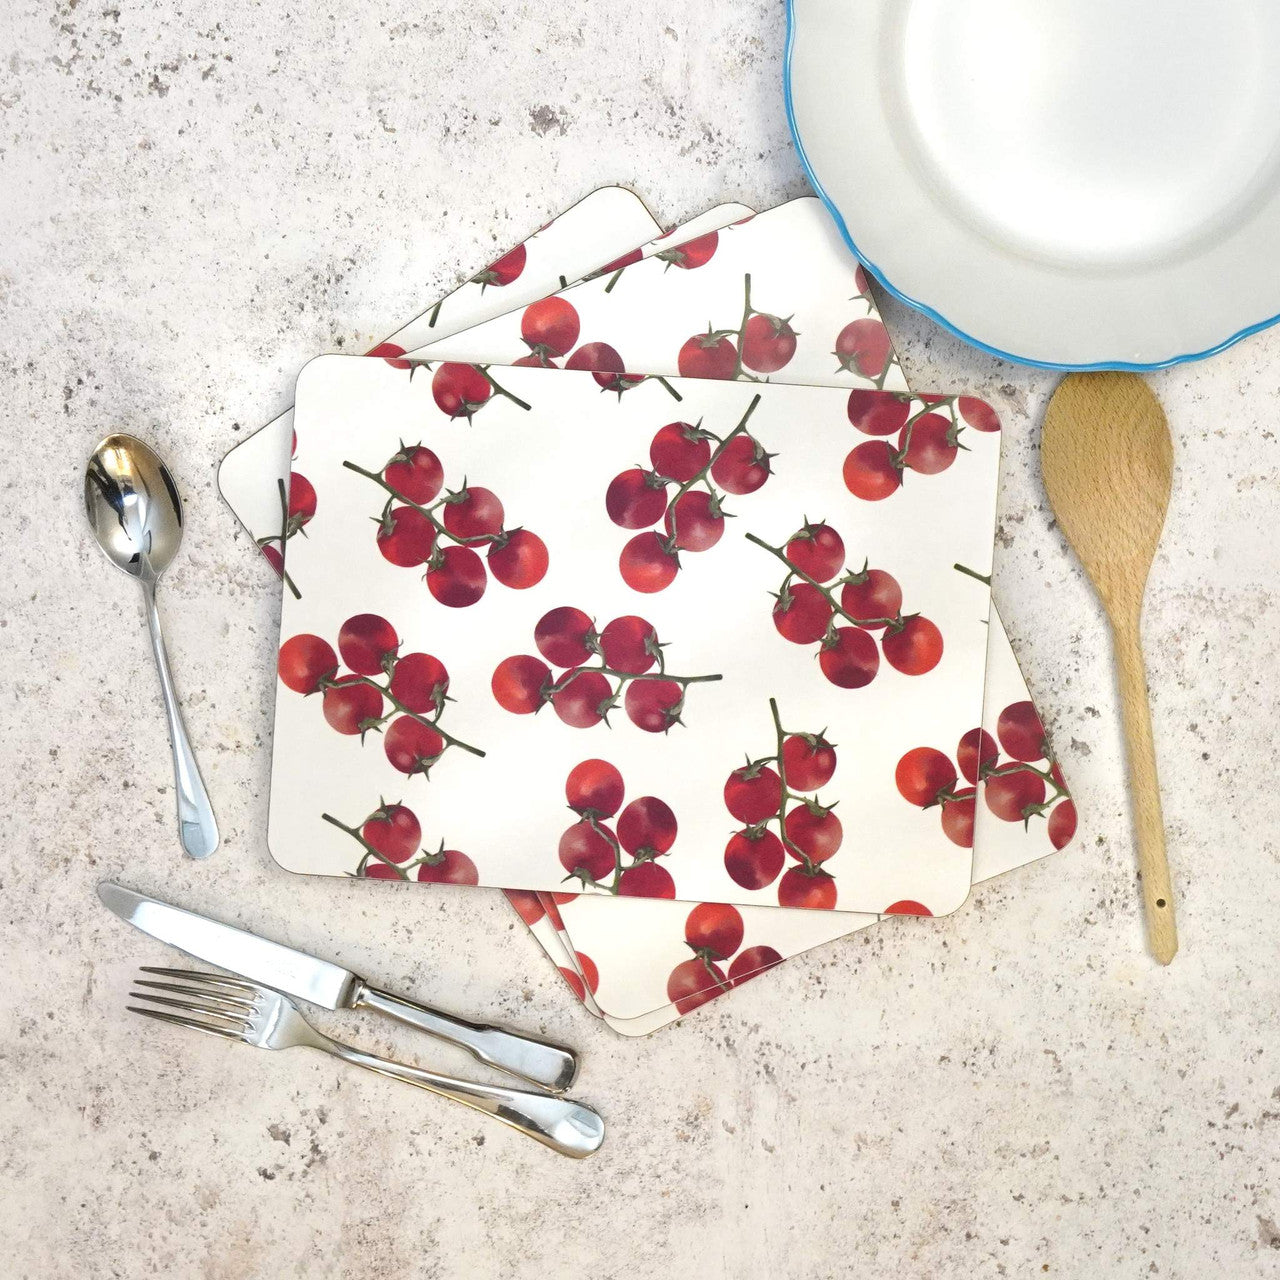 Tomato Placemat by Corinne Alexander.